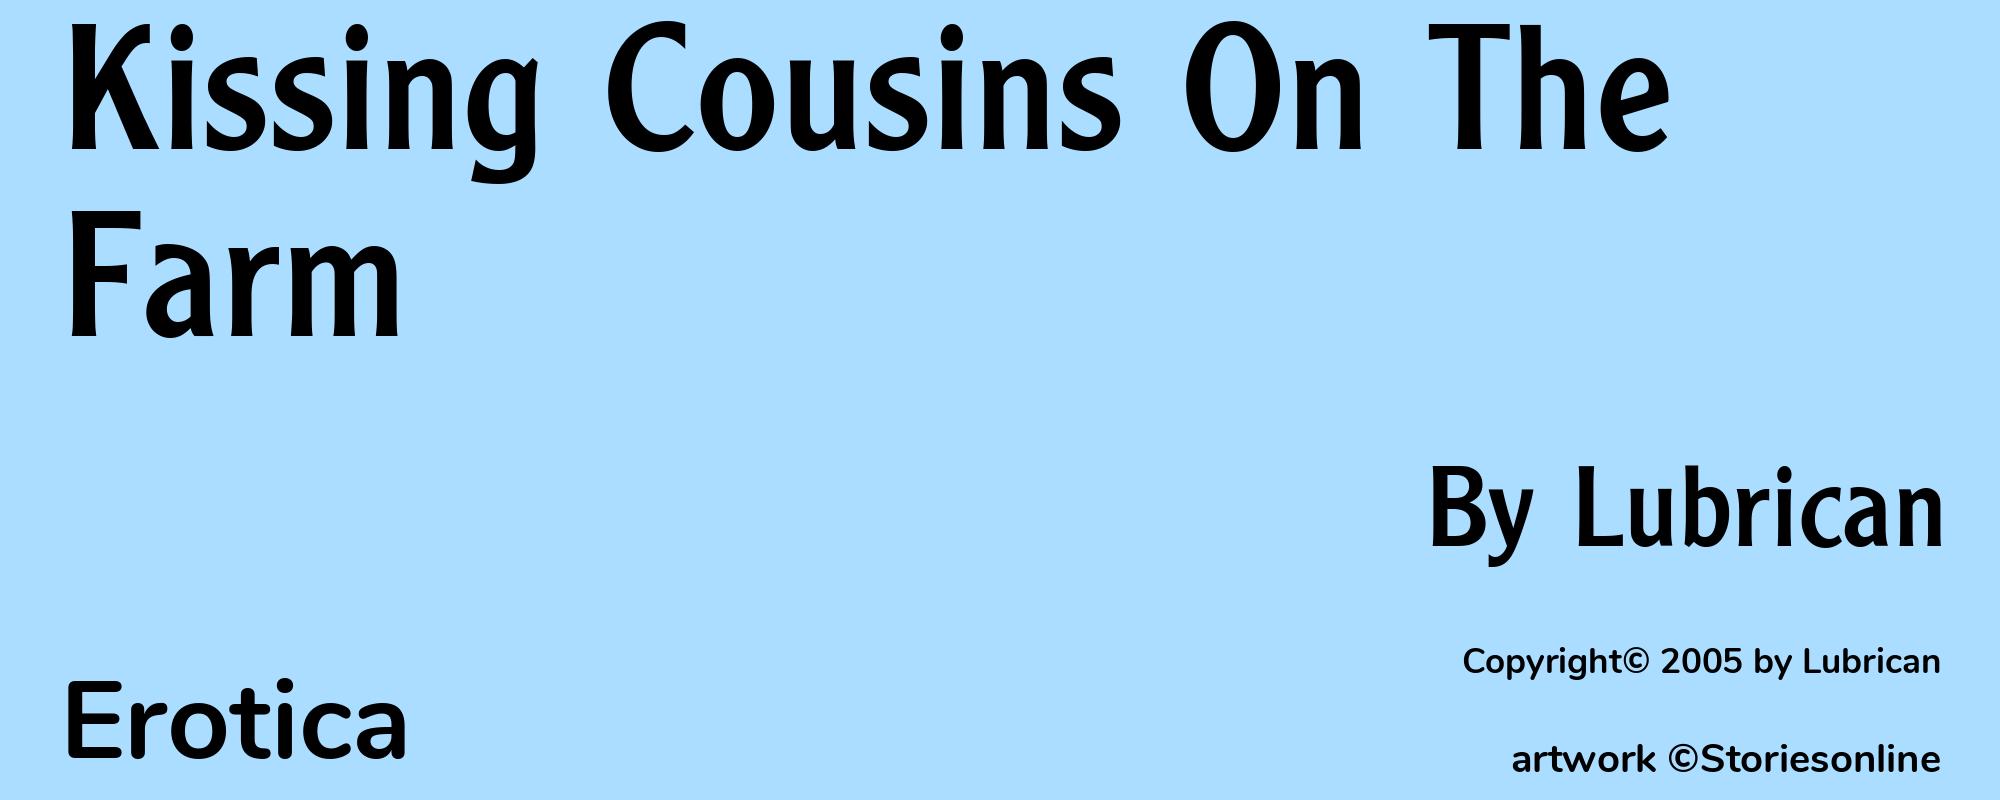 Kissing Cousins On The Farm - Cover